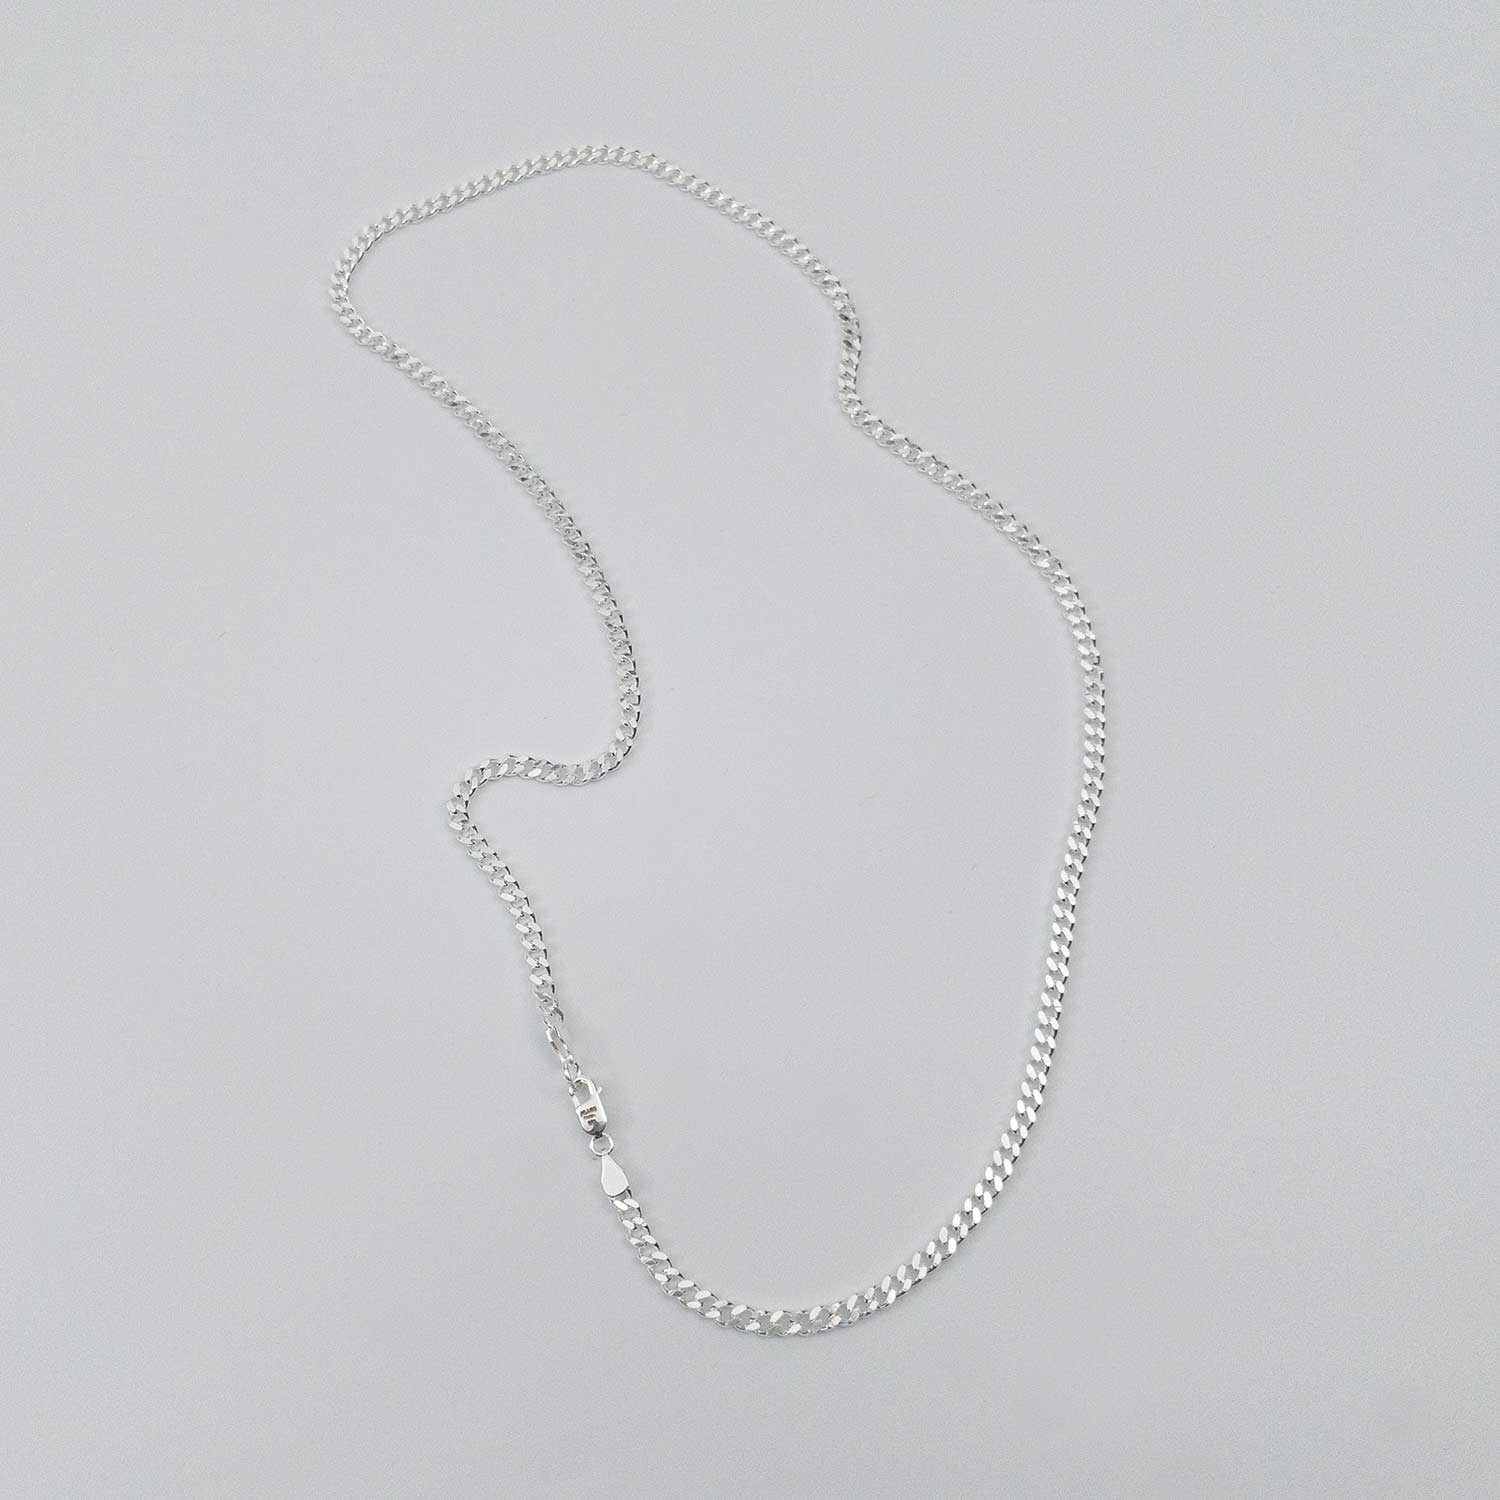 Sterling Silver 3mm Cuban Chain made by FEARS 925 - Personal Fears